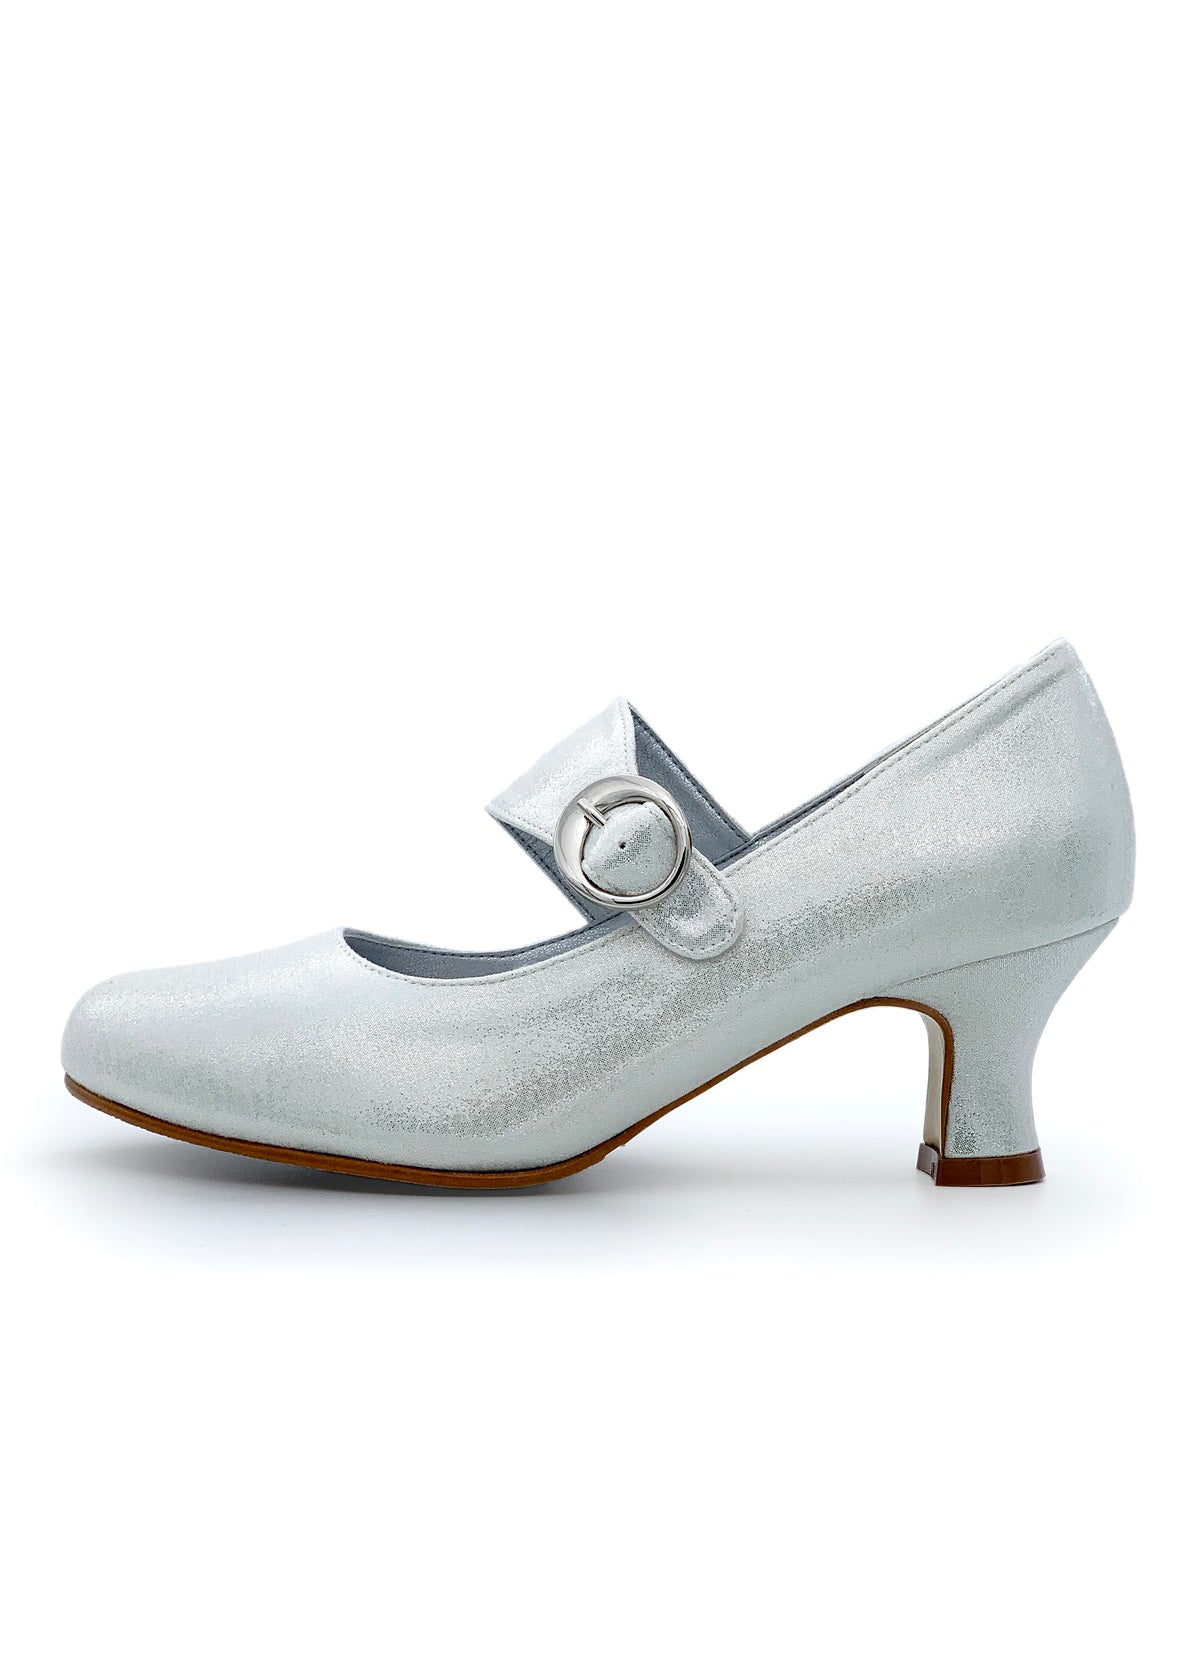 Open toe shoes with wide buckle straps - white, silvery fabric